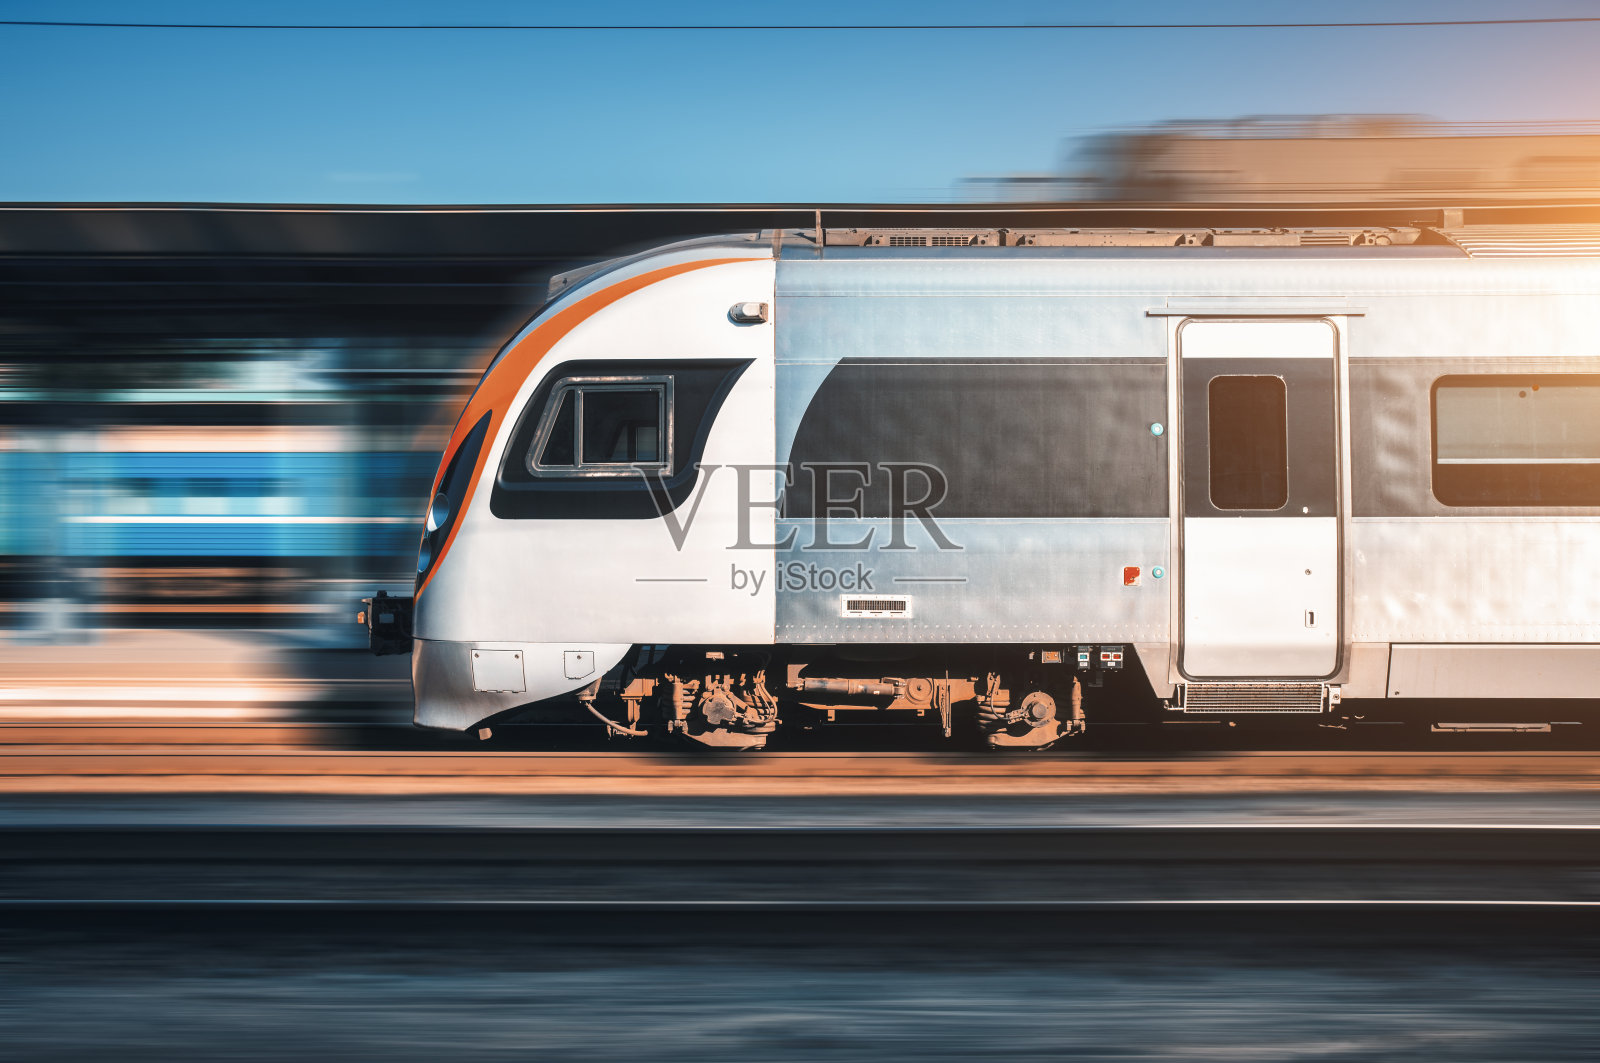 Speed train in motion at the railway station at sunset in Europe. Modern intercity train on railway platform with motion blur effect. Moving passenger train on railroad. Transportation. Vintage照片摄影图片